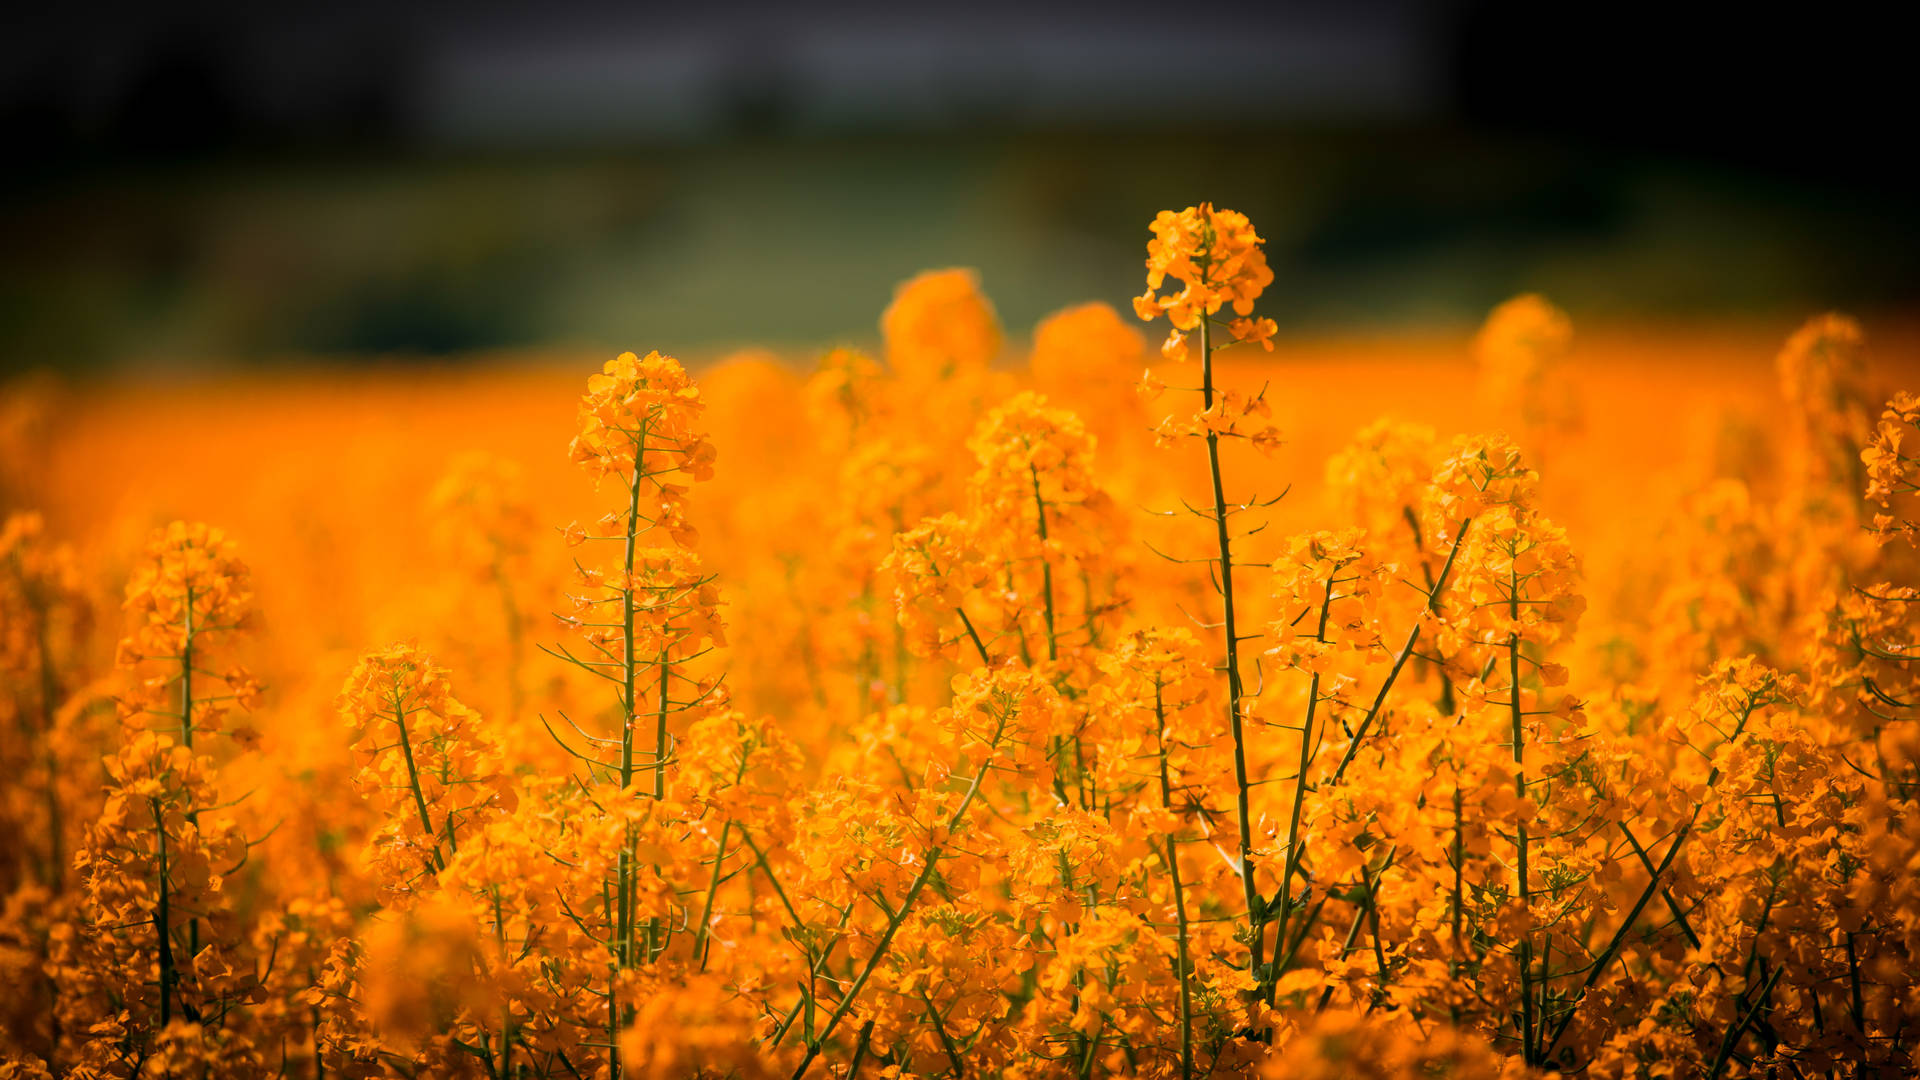 A field of golden grass and colorful flowers Wallpaper